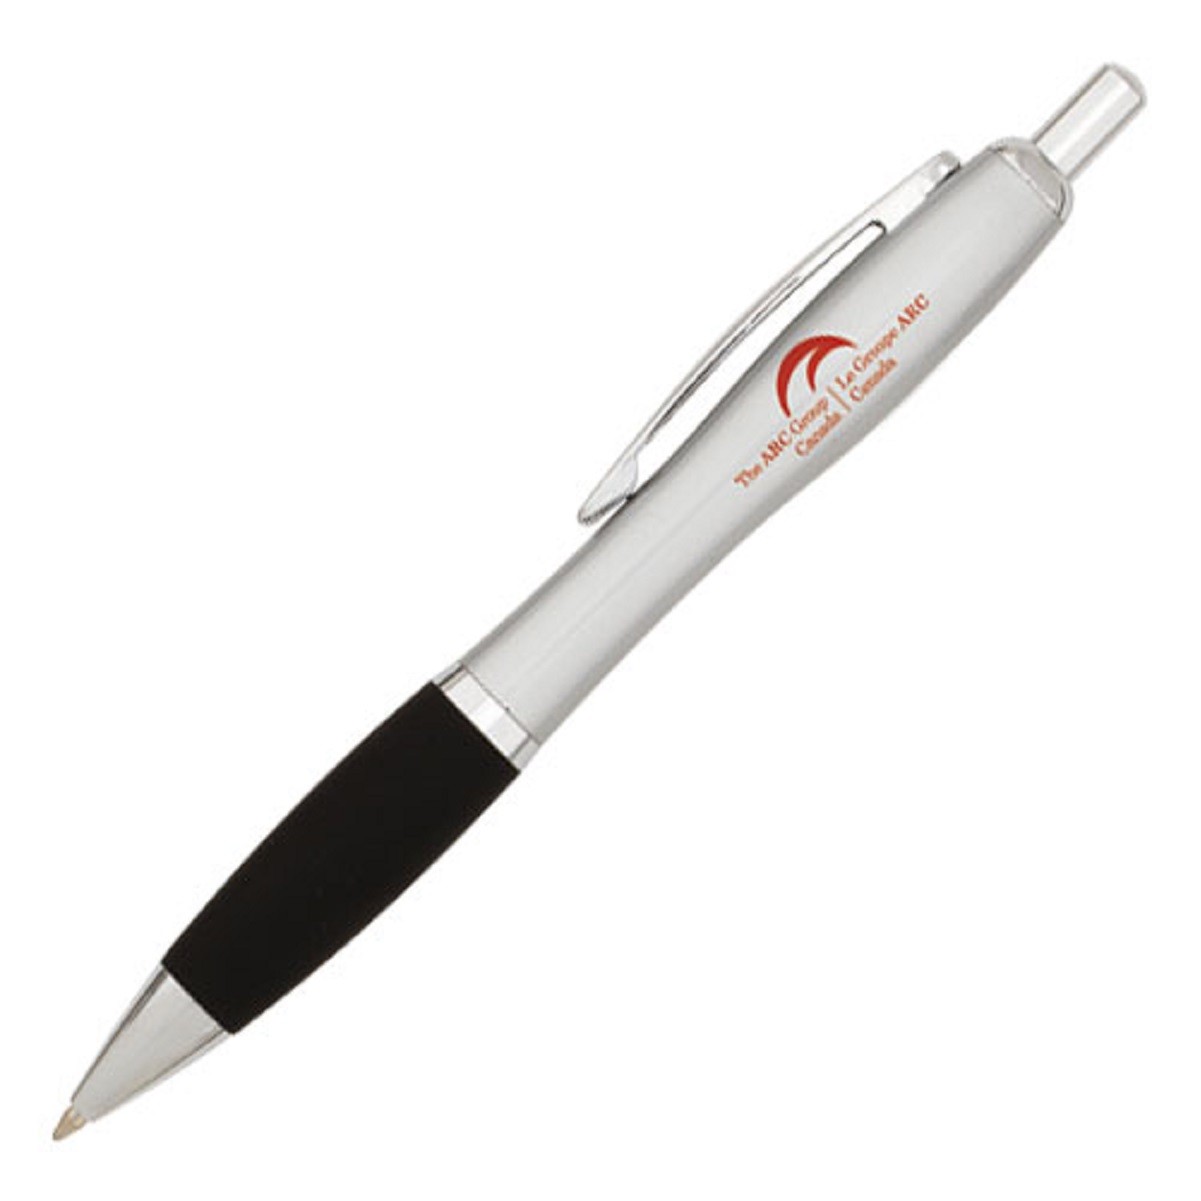 Lima Metal Click Action Ballpoint Pen (3-5 Days) CLEARANCE ITEM, Limited qty